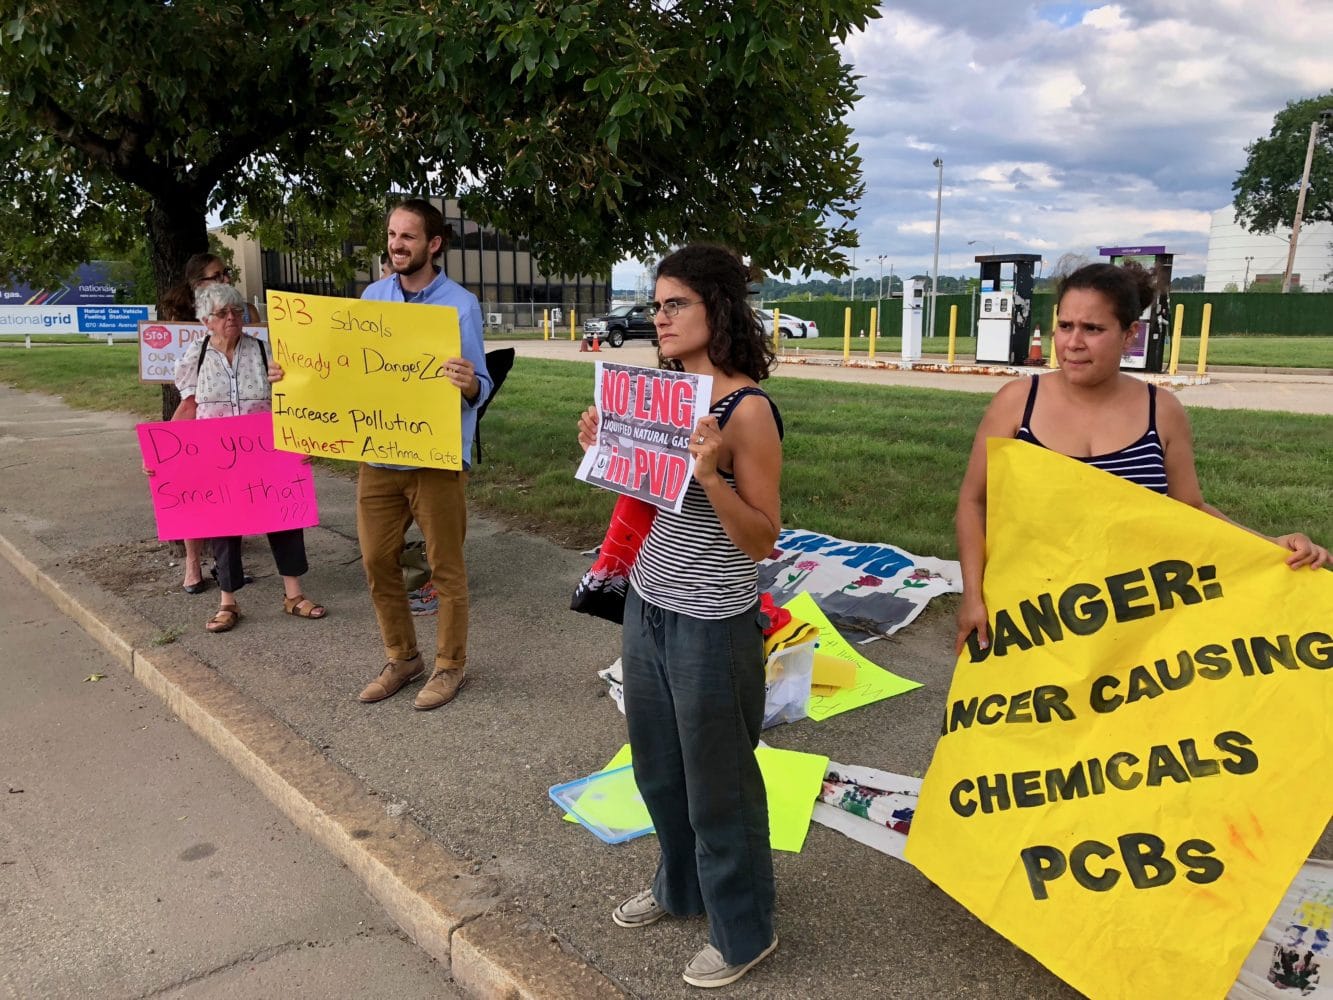 No LNG in PVD continues to protest Grid’s liquefaction facility